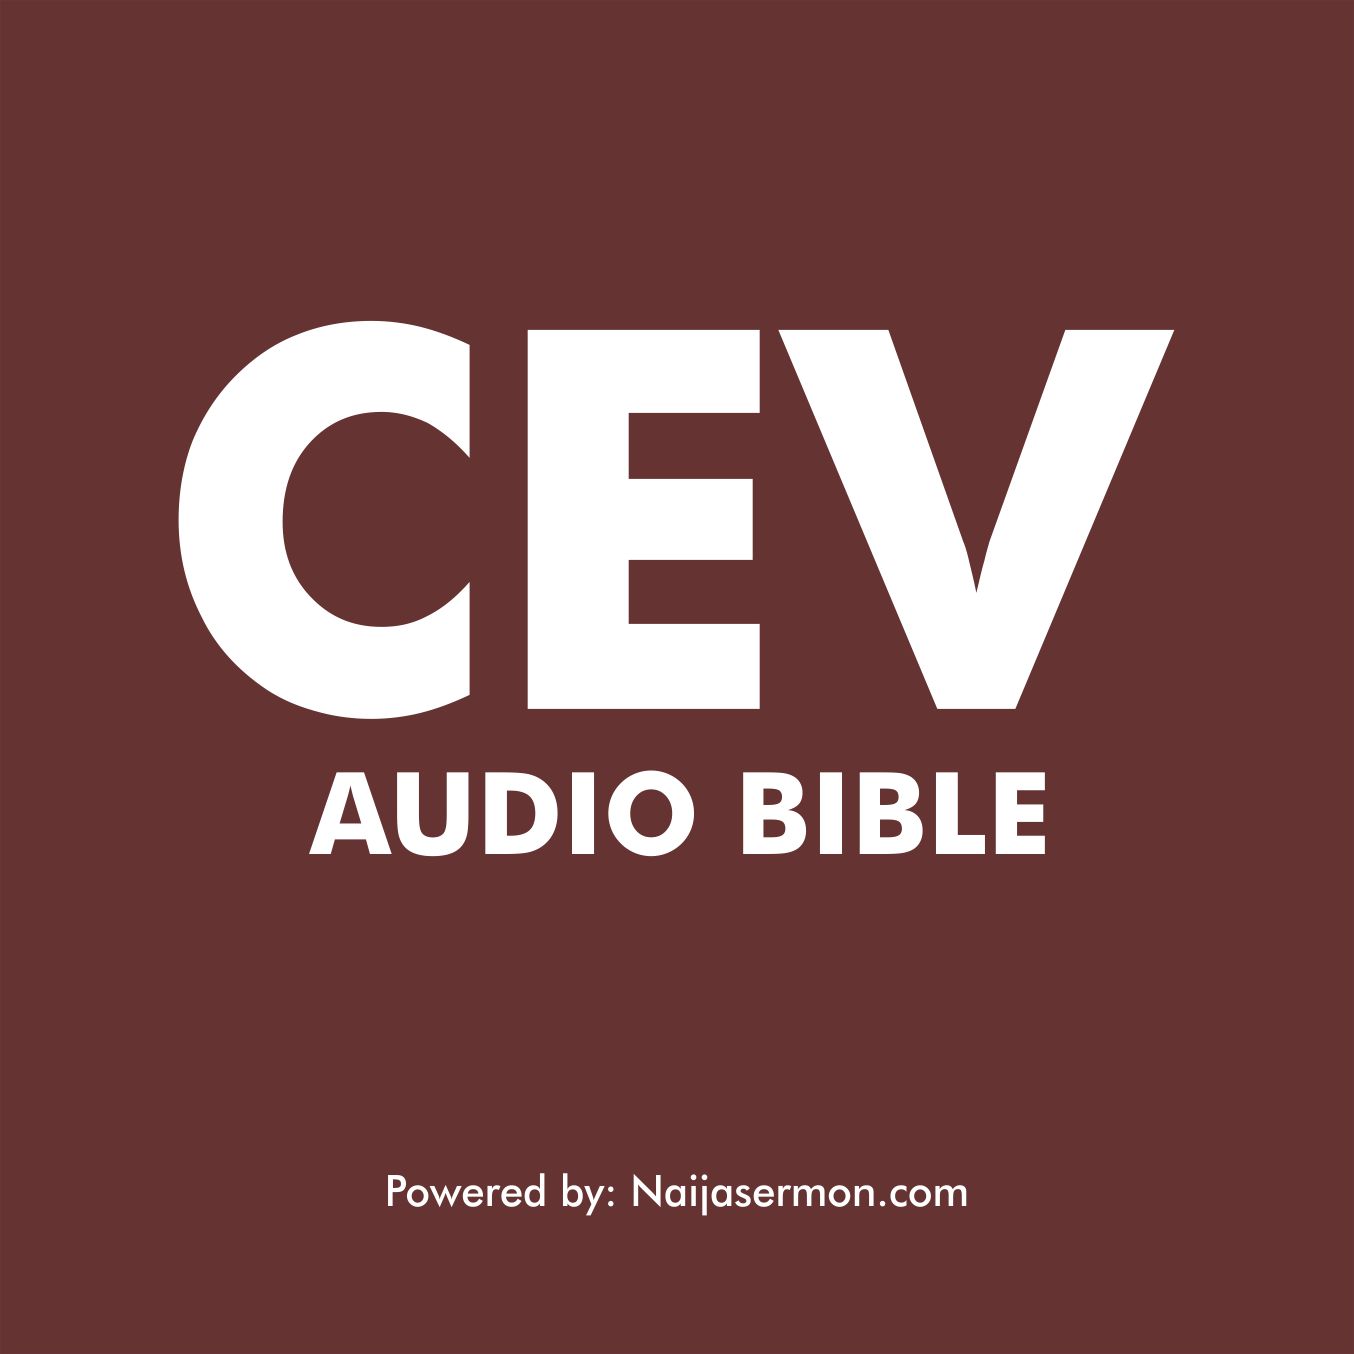 [Free] Download Contemporary English Version (CEV) Audio Bible MP3 - Dramatized 20